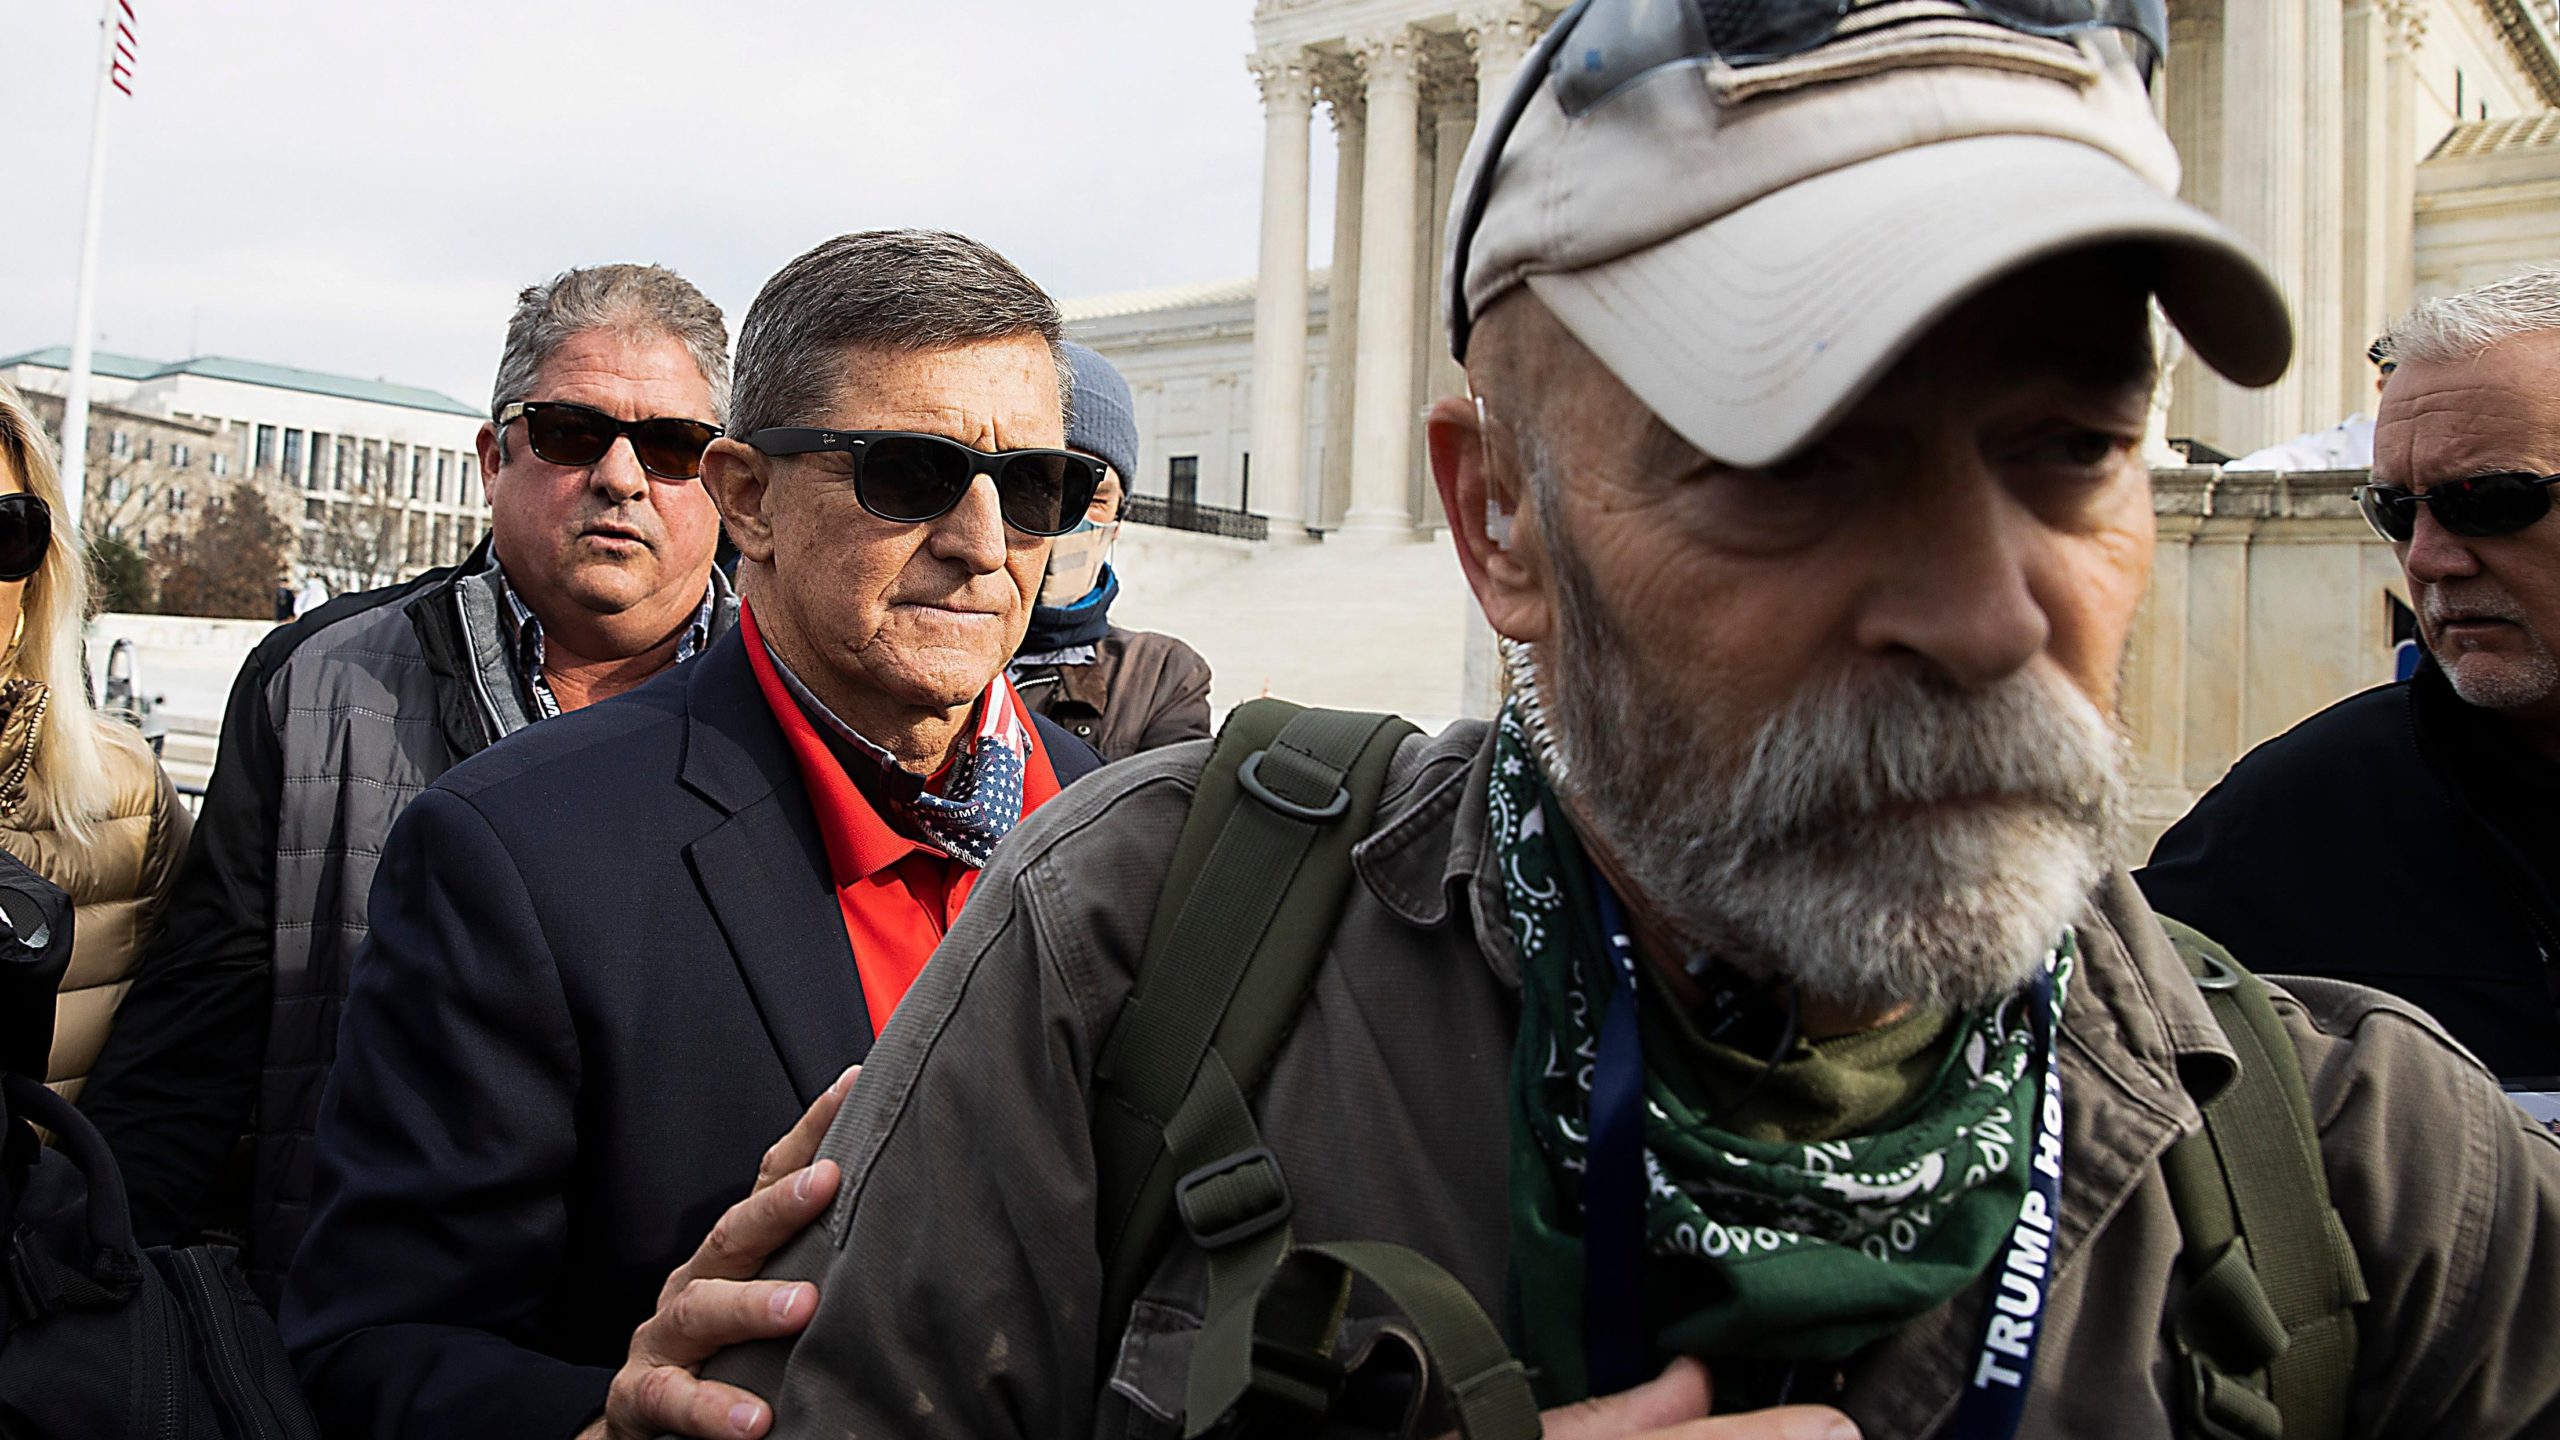 Former General Michael Flynn, centre, protesting the outcome of the 2020 elections outside the Supreme Court on Dec. 12, 2020. (Photo: Tasos Katopodis, Getty Images)